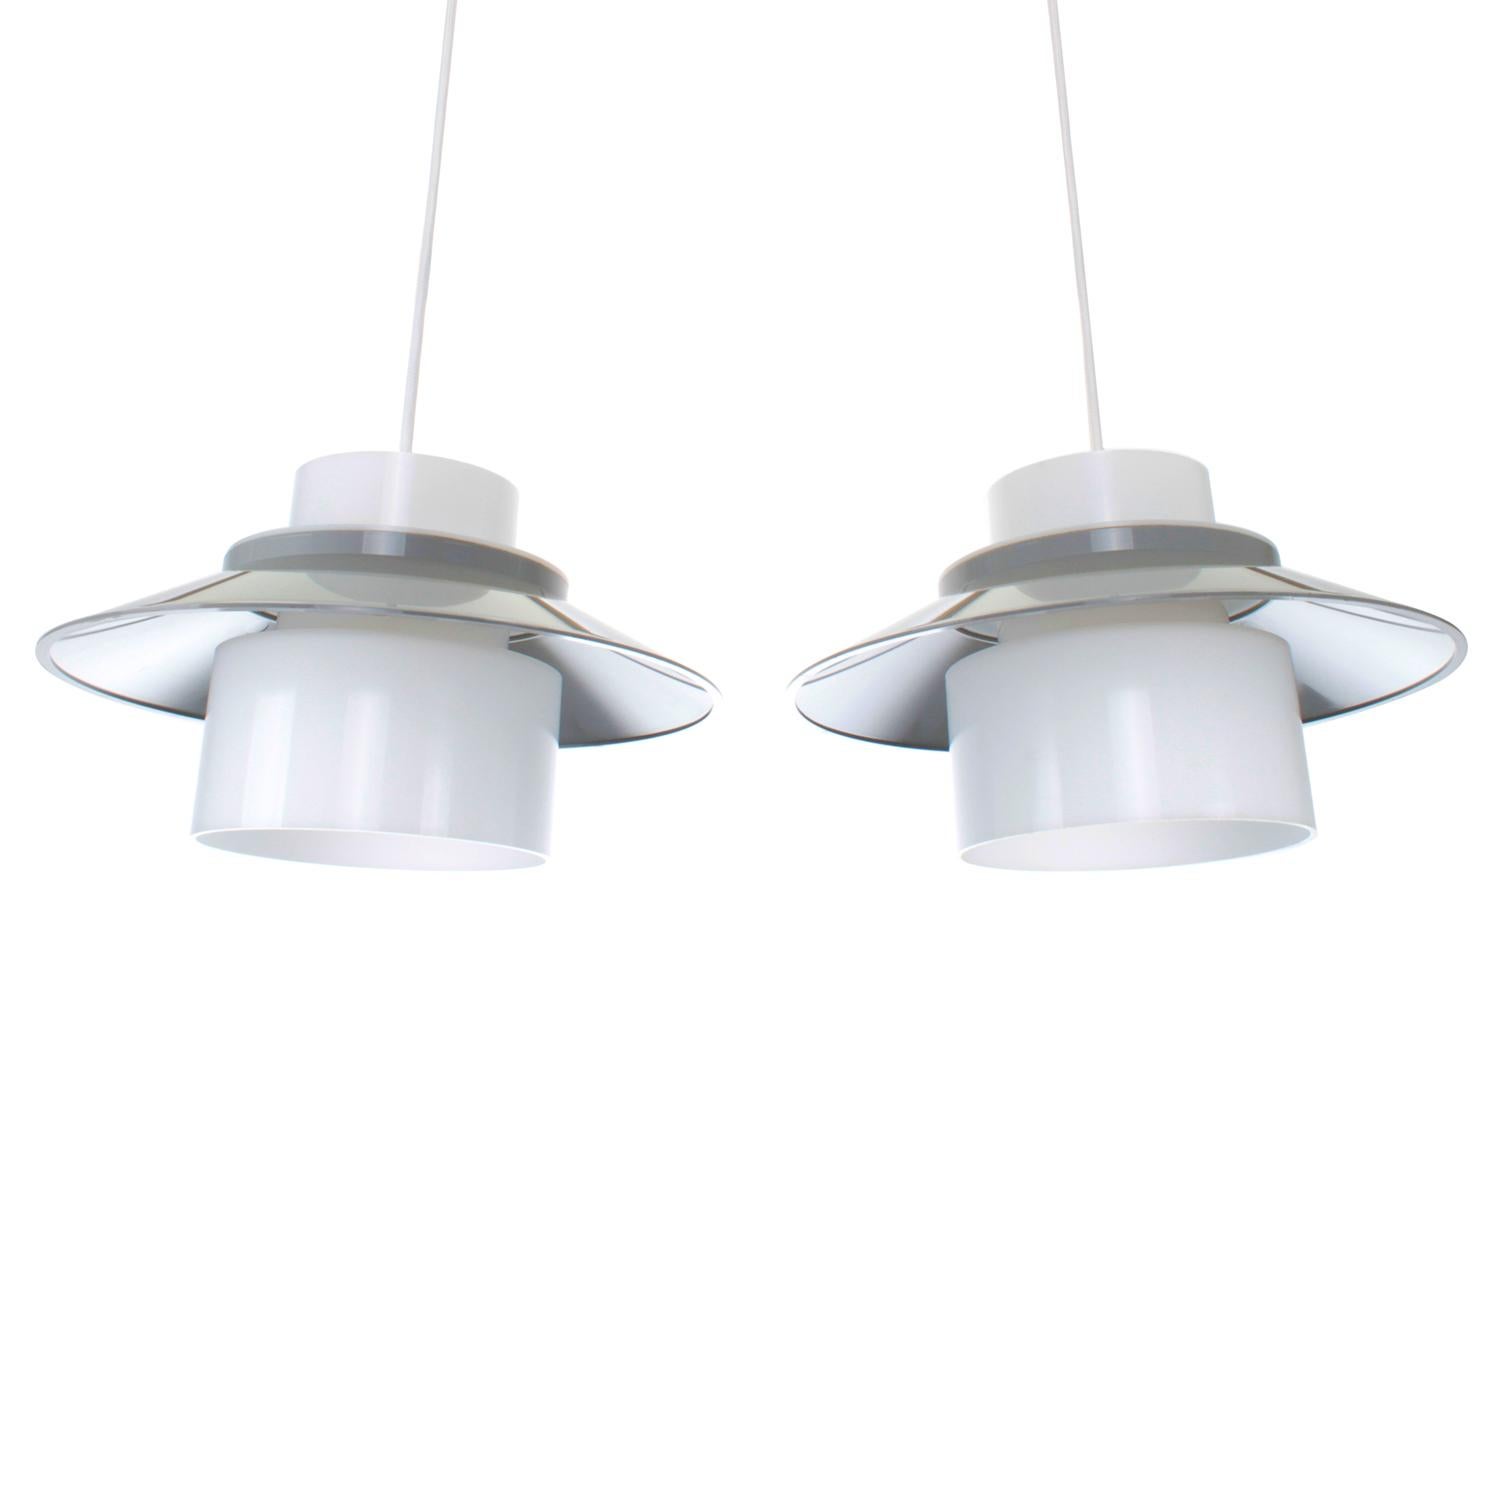 Danish Dinette Pair of Gray and White Ceiling Lamps by Bent Karlby in 1970 for Lyfa